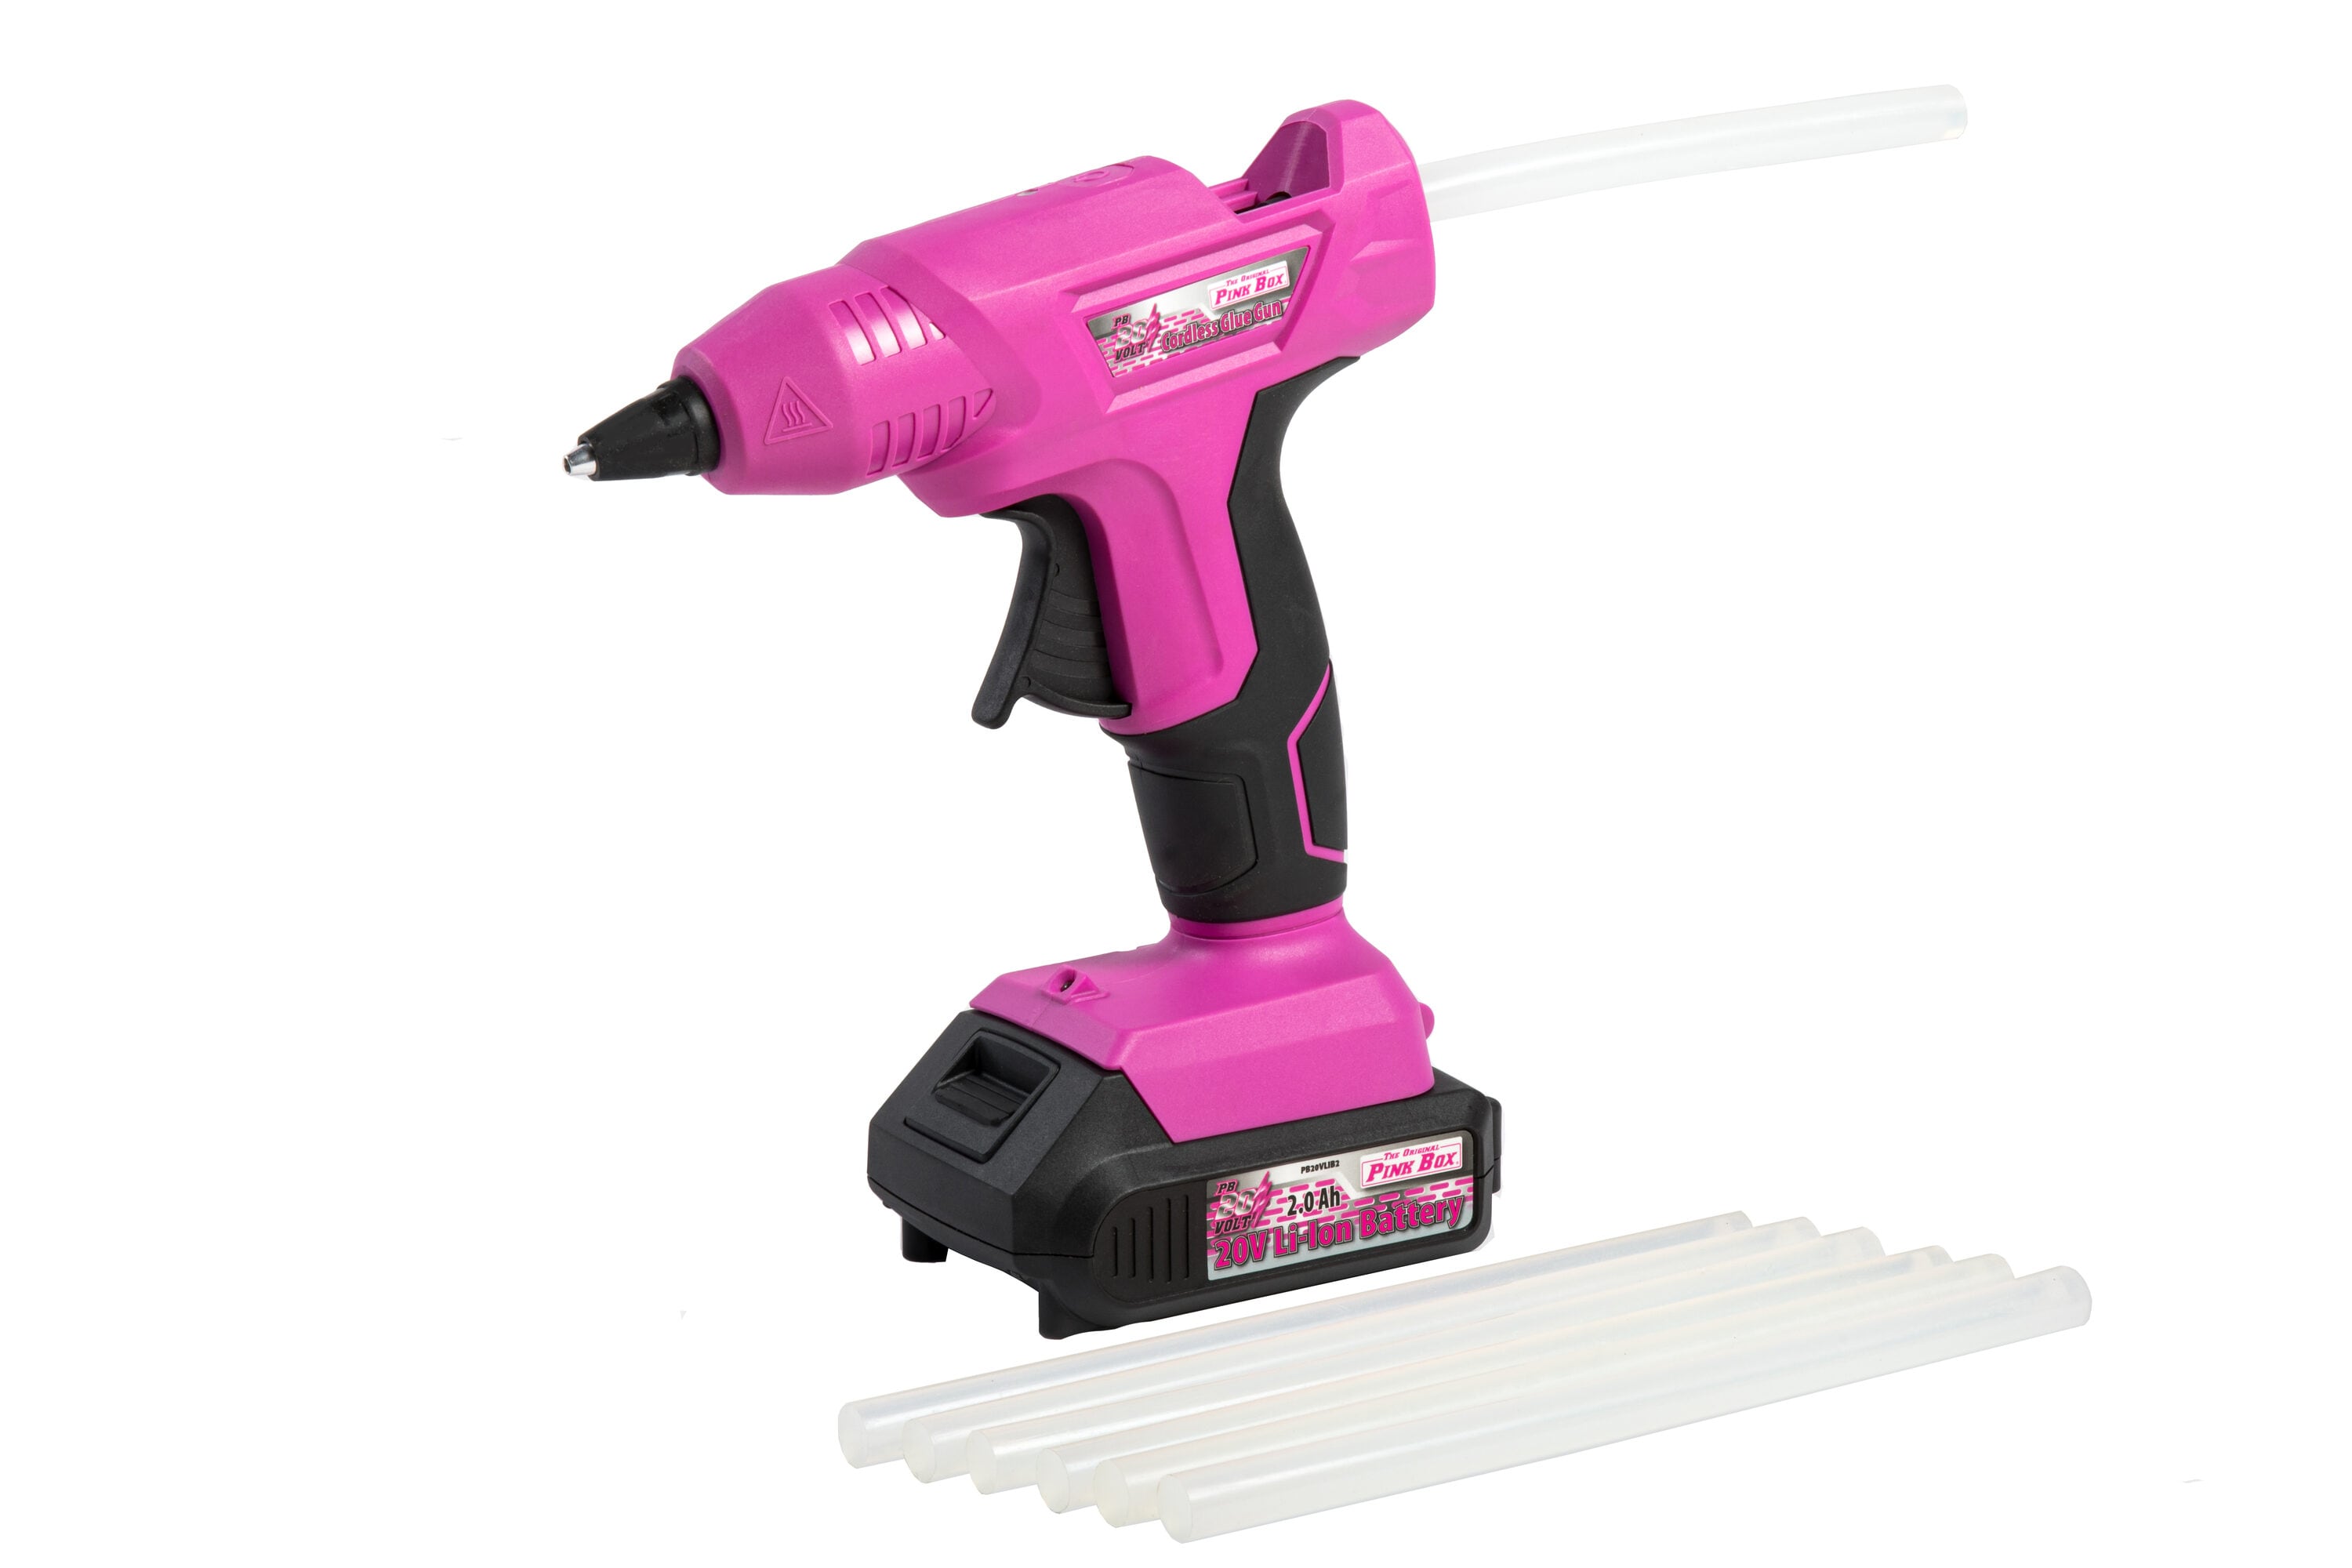 The Original Pink Box Pb20vglg_2ah_chrgr 20 Volt Lithium-Ion Cordless Glue Gun with Battery and 10 Quanity 11M Glue Sticks